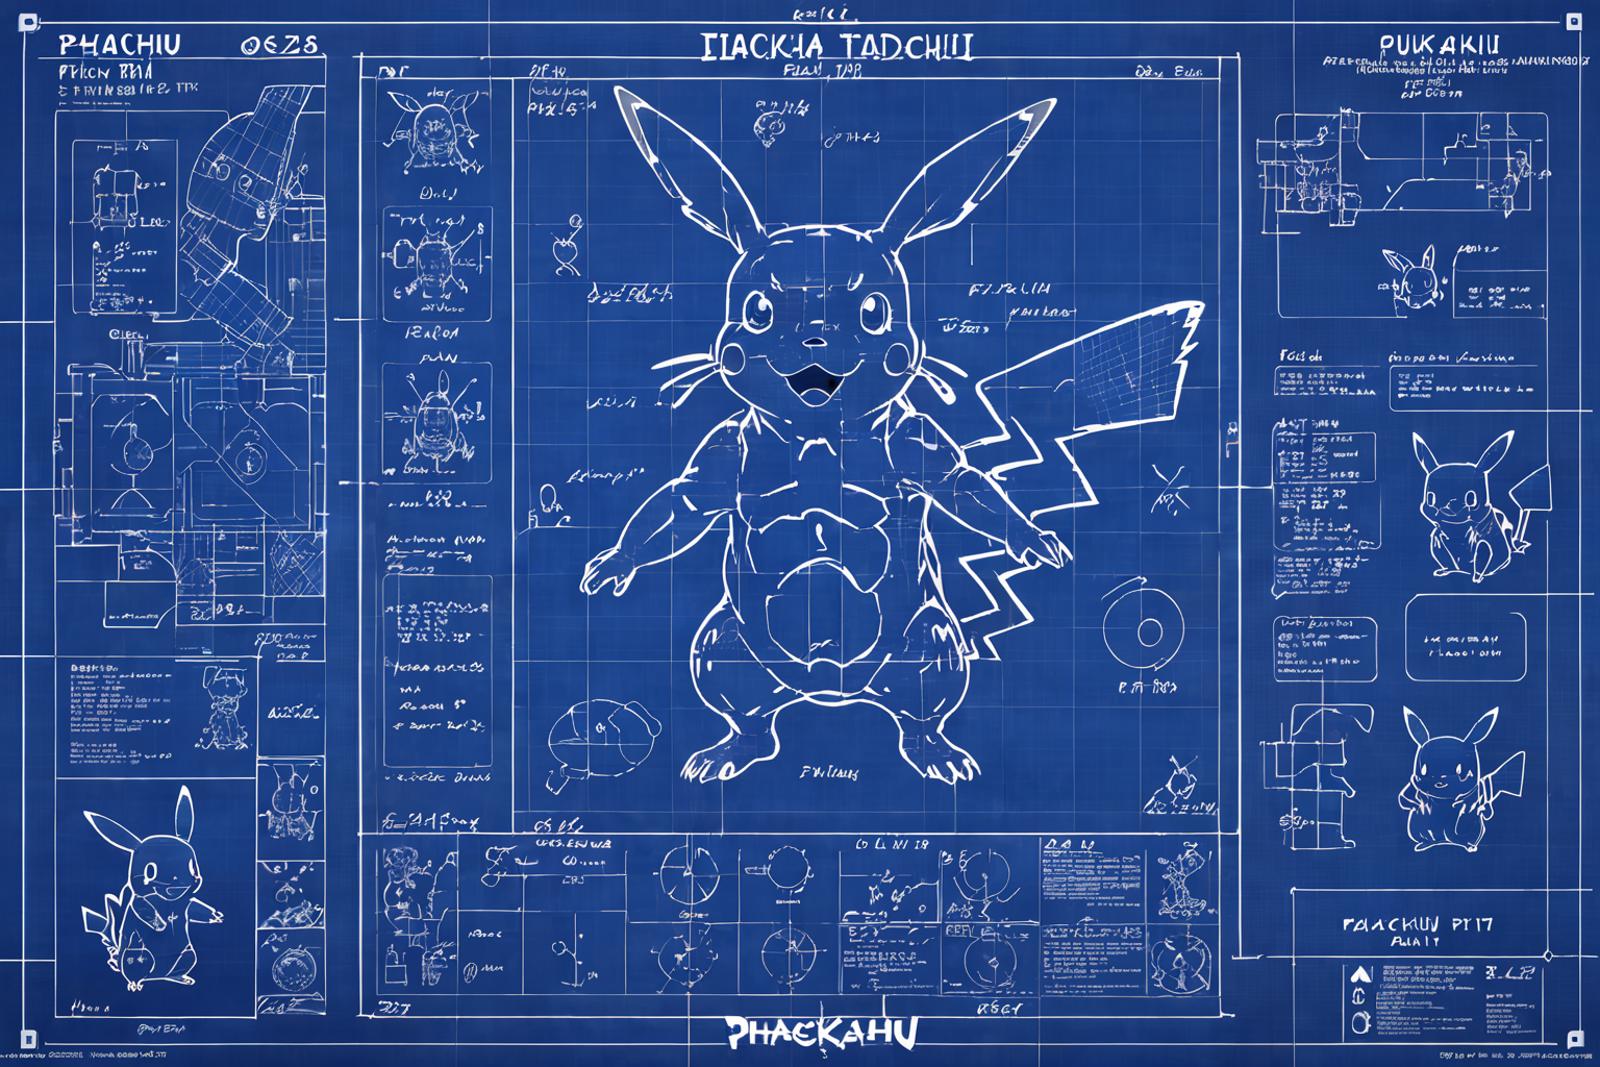 A blueprint of a Pokemon character, specifically Pikachu, with detailed drawings.